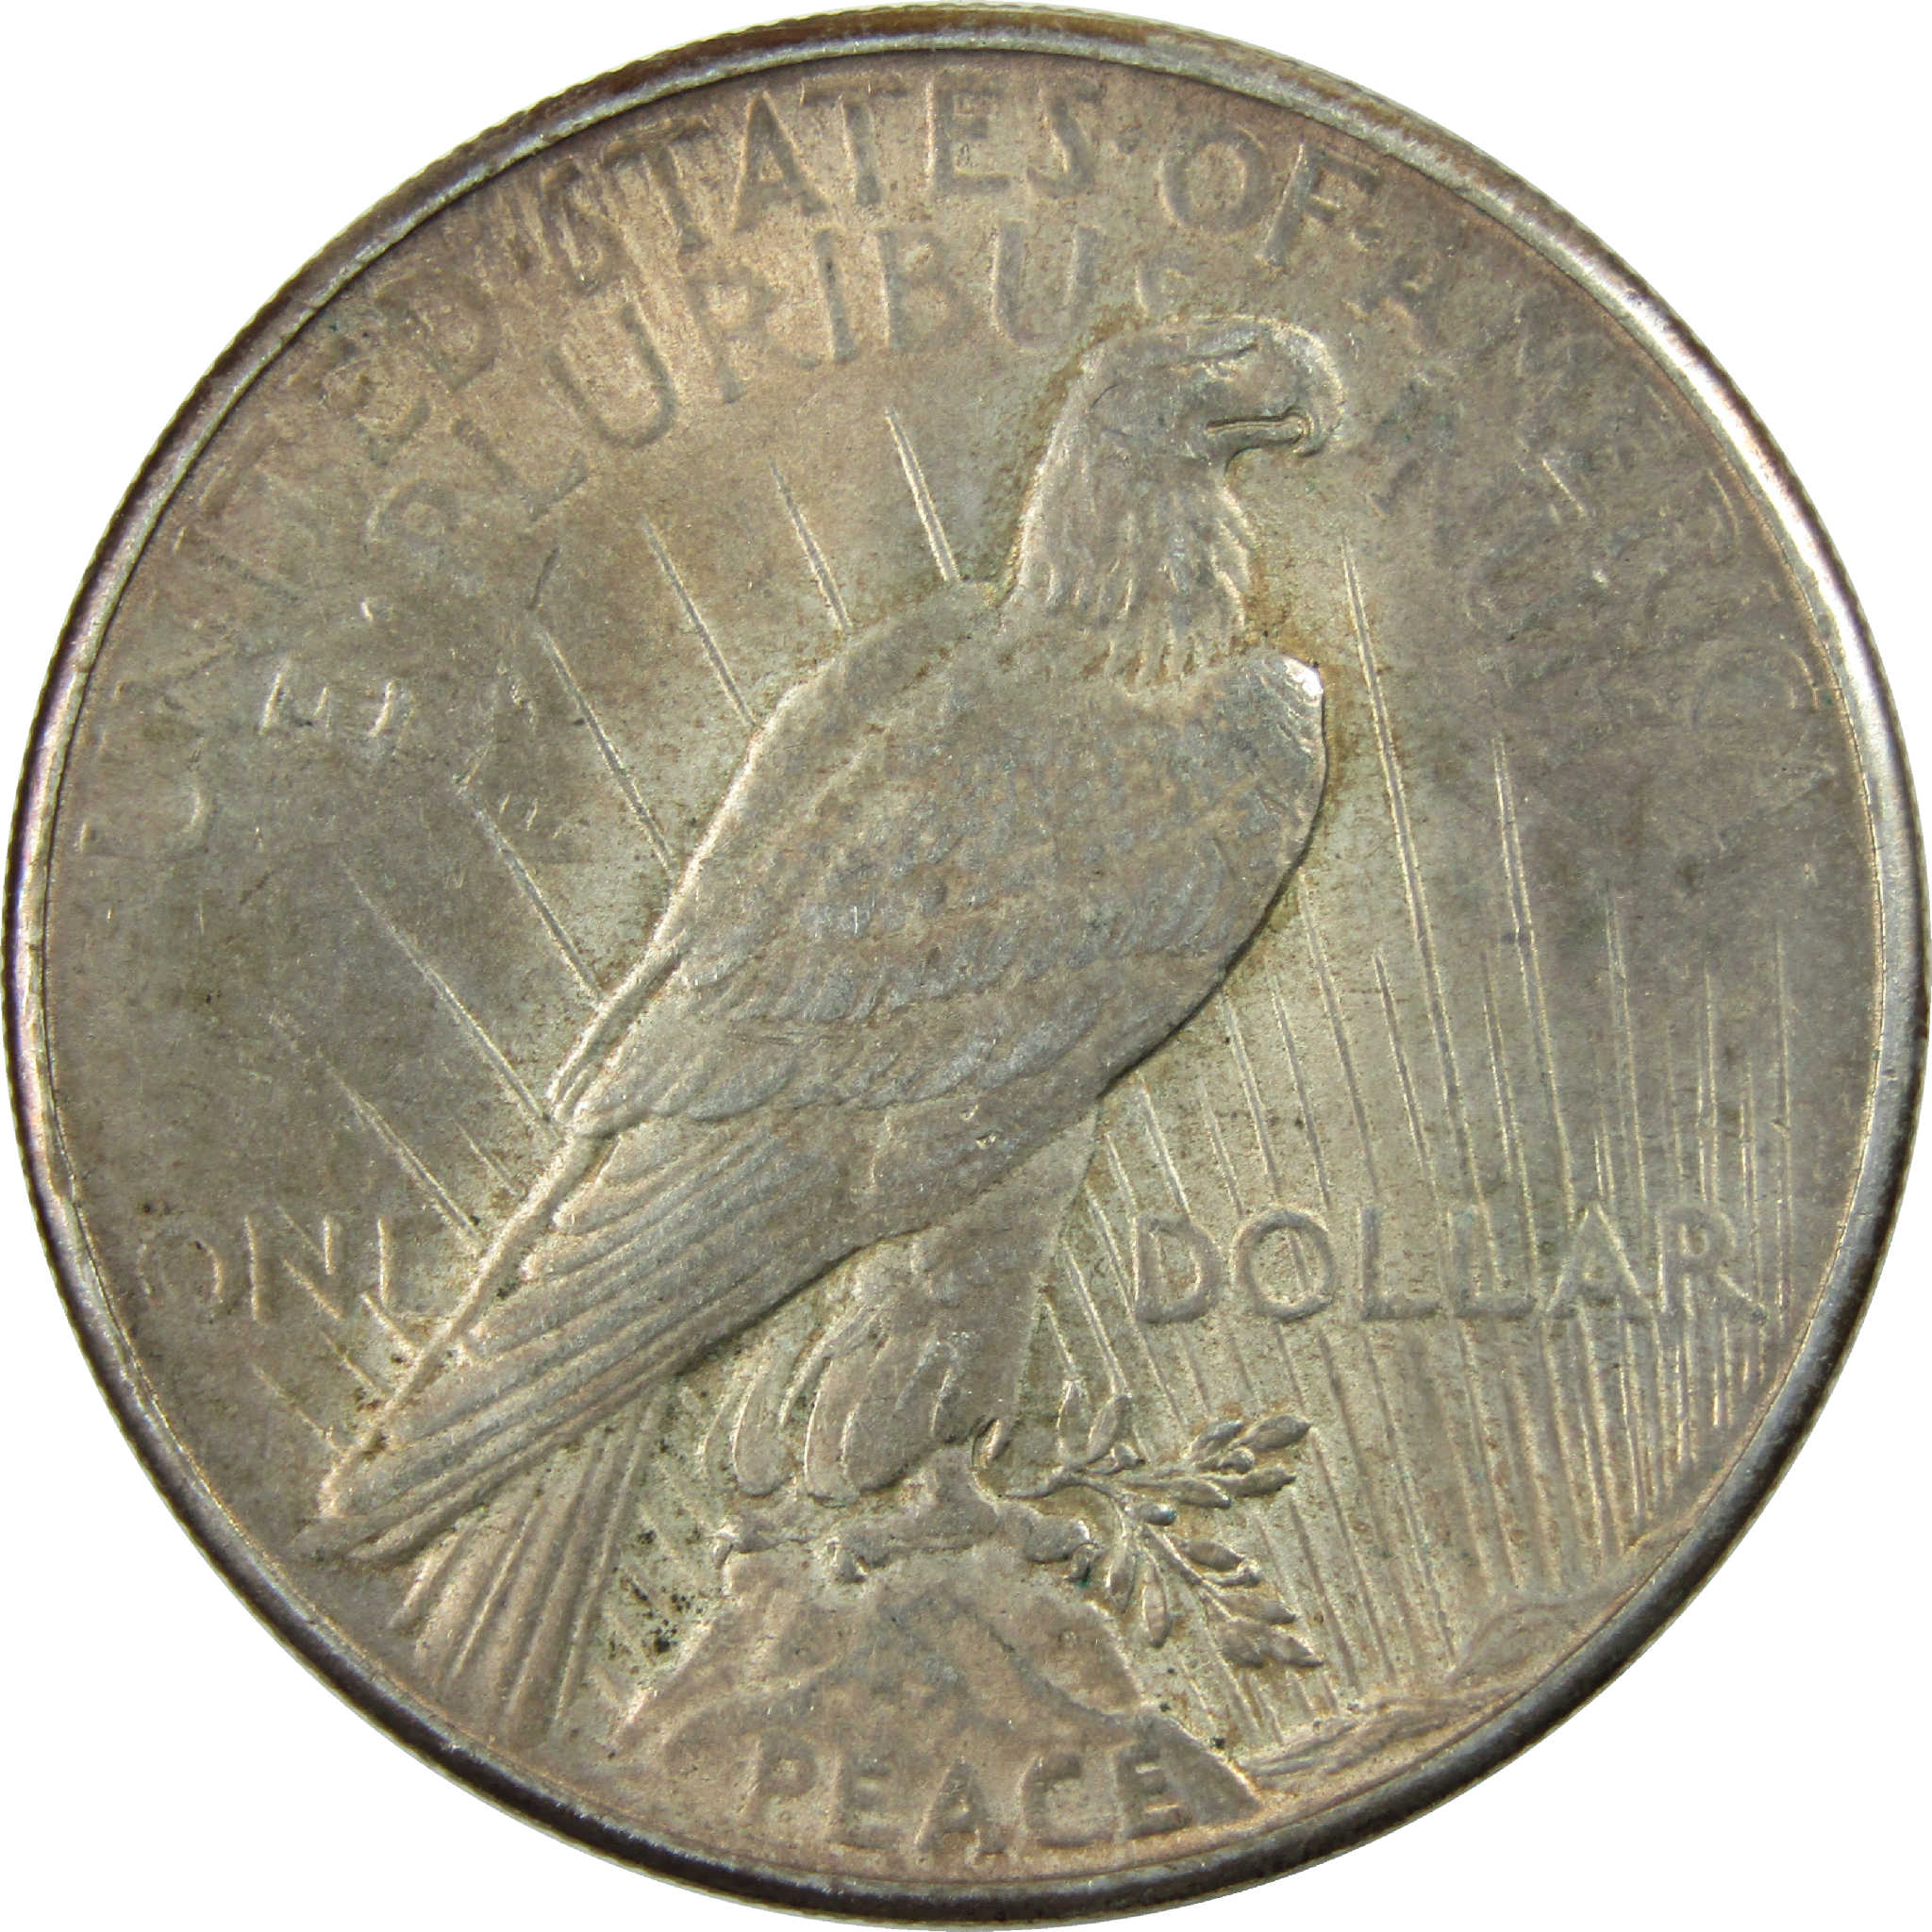 1935 Peace Dollar AU About Uncirculated Silver $1 Coin SKU:I12249